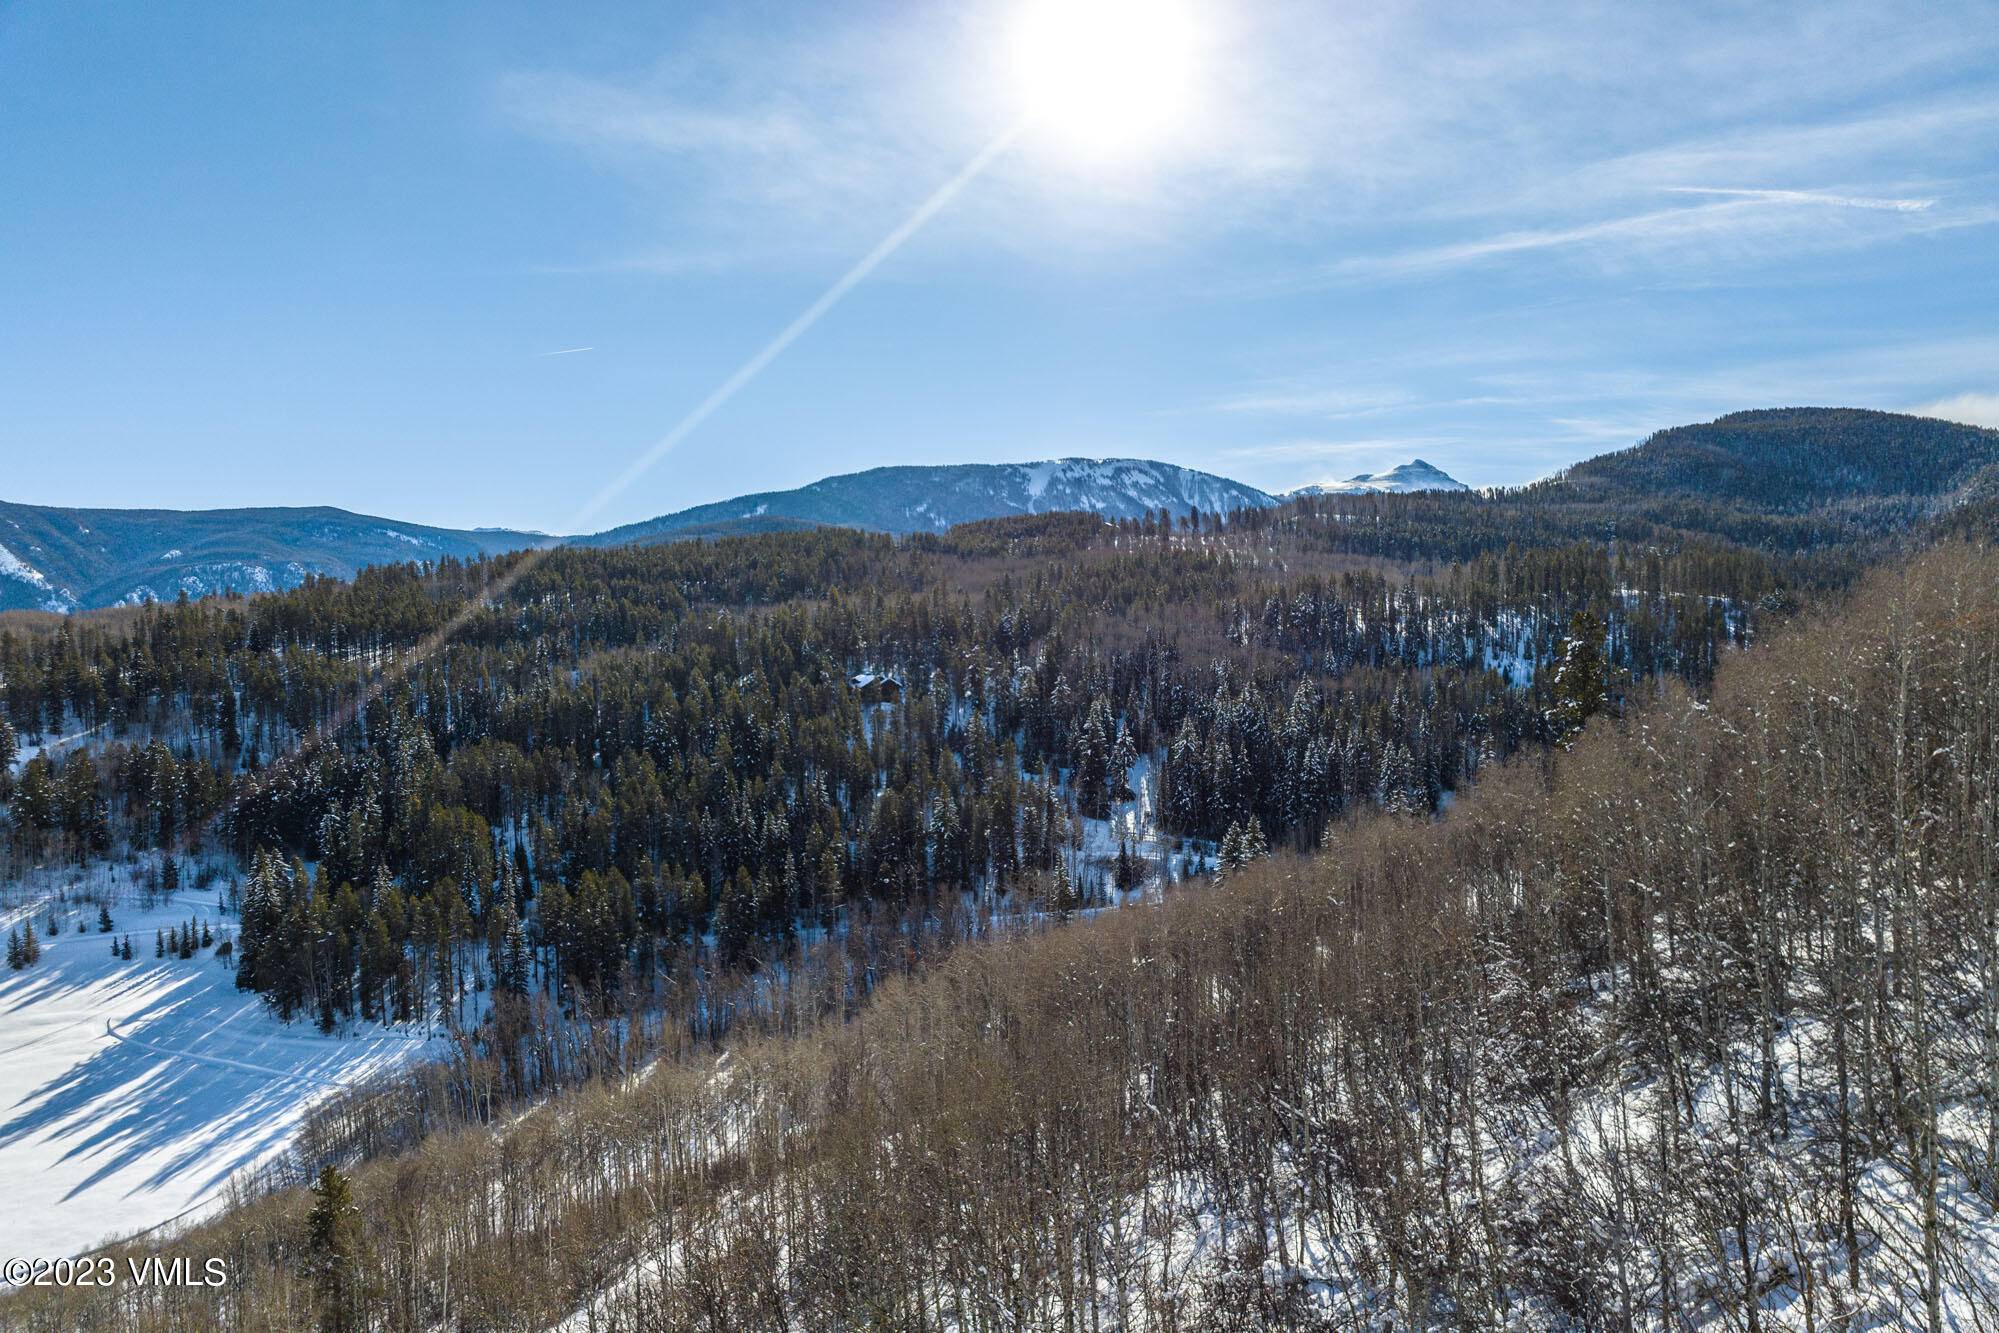 Ownership in Casteel Creek provides only 12 properties exclusive access to approximately 4 miles of maintained and groomed private trails and acres of recreation easement area that connects those trails ...